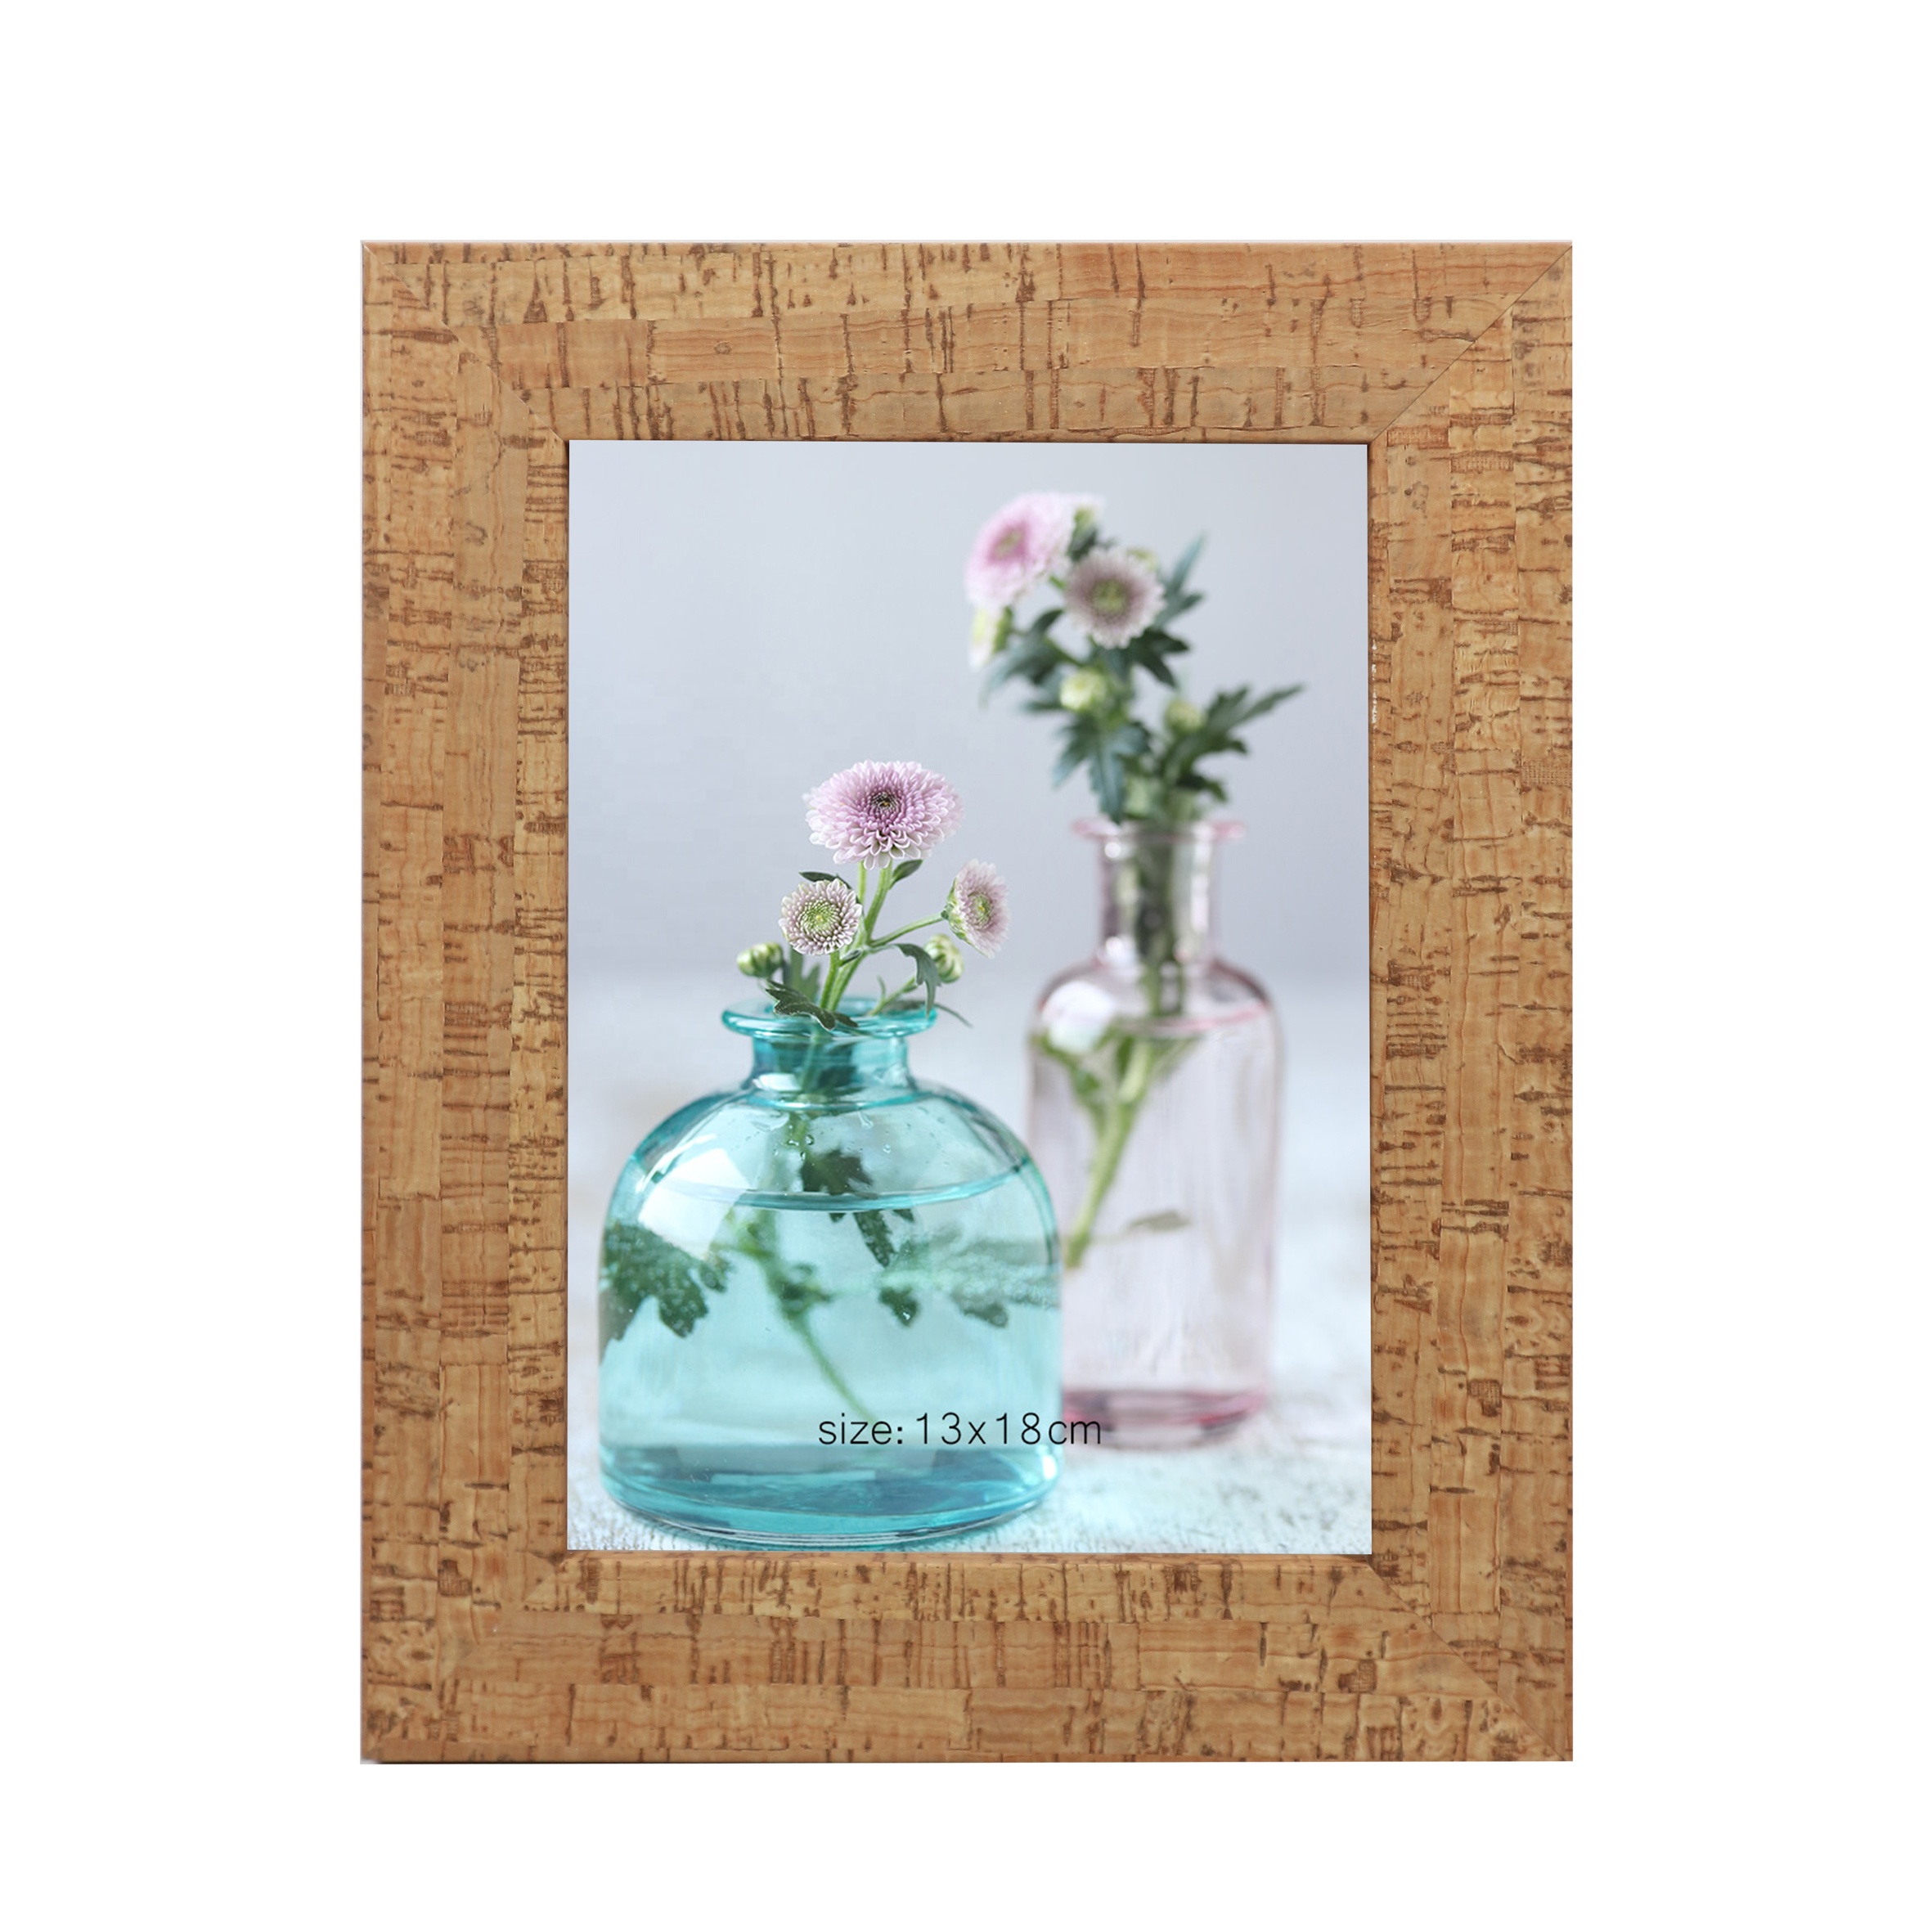 Wooden wholesale photo frame natural color for Home Decor 5x7 inch